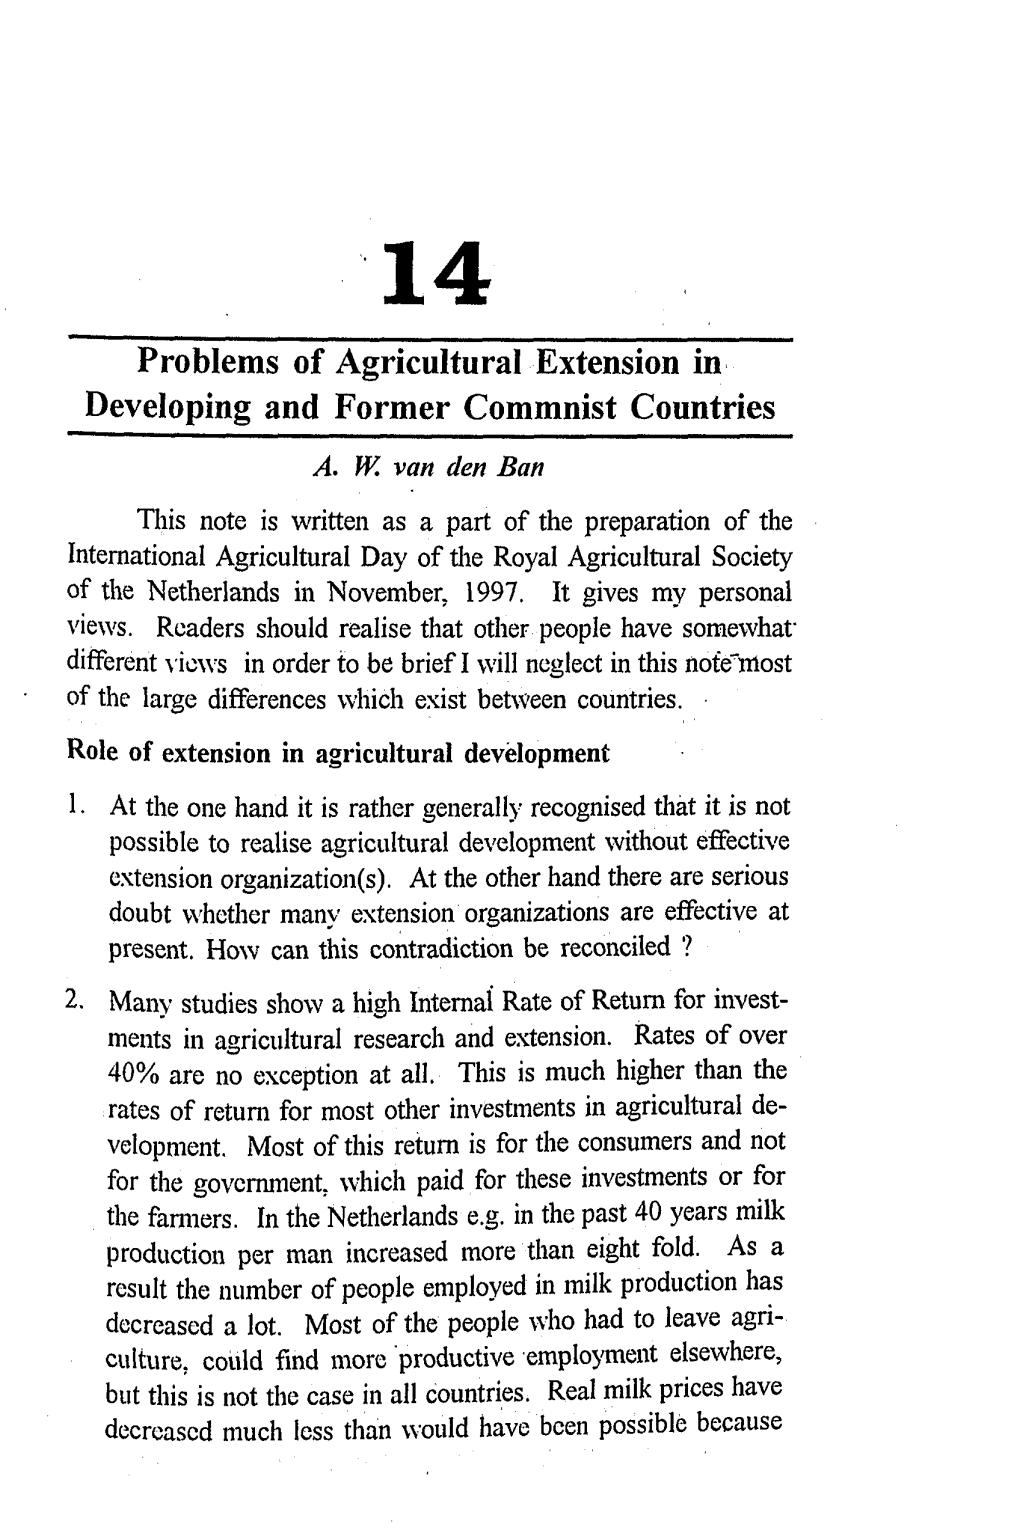 Problems of Agricultural Extension in Developing and Former Commnist Countries A